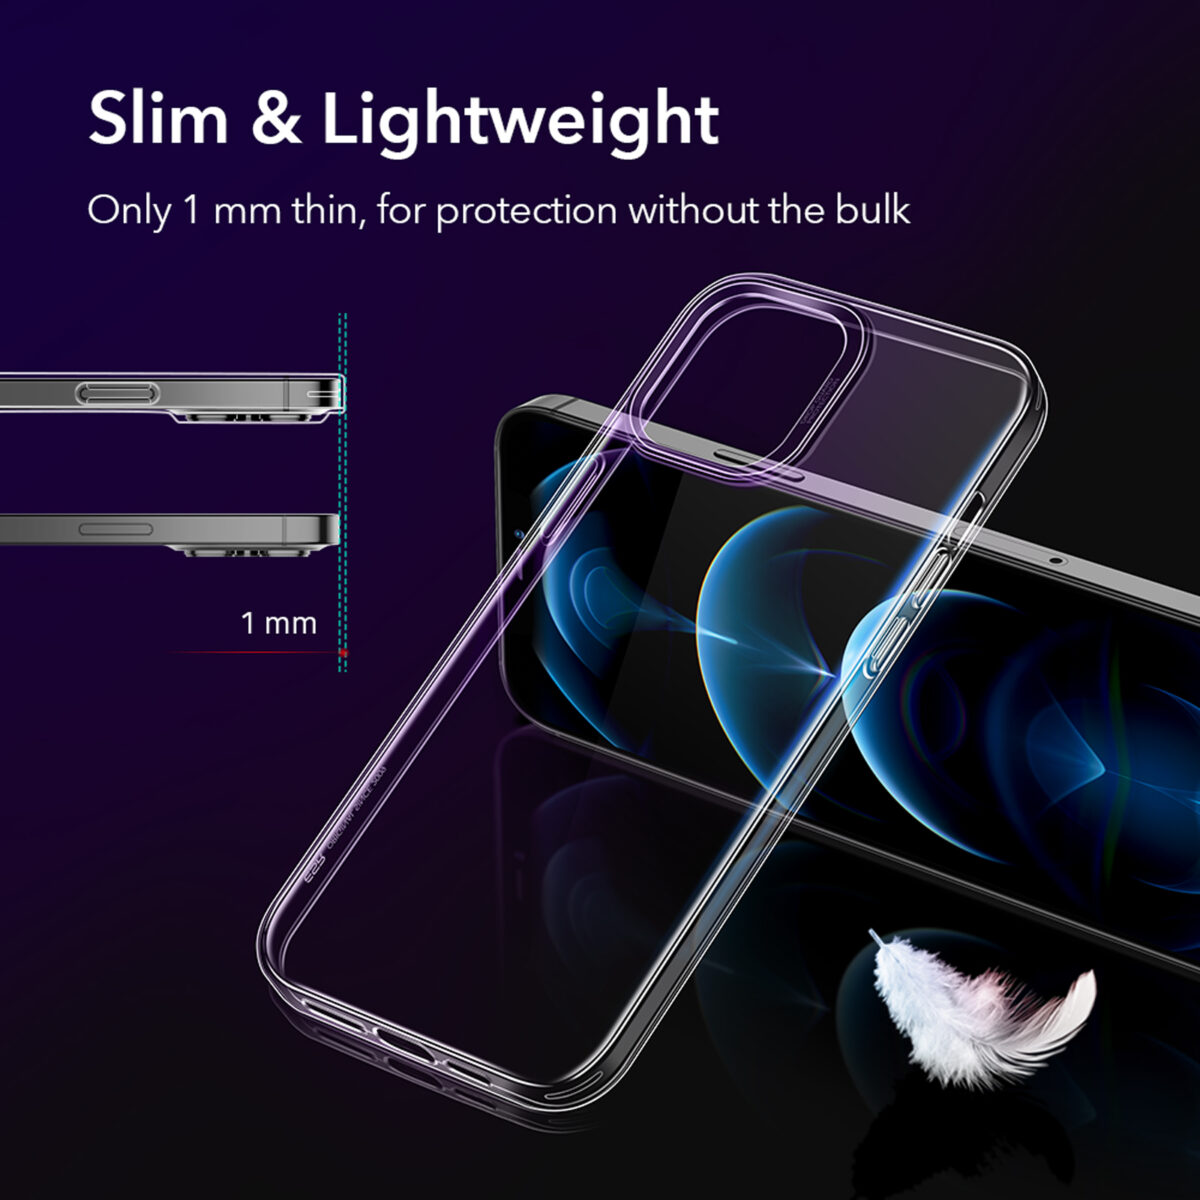 Slim and lightweight back case for iphone